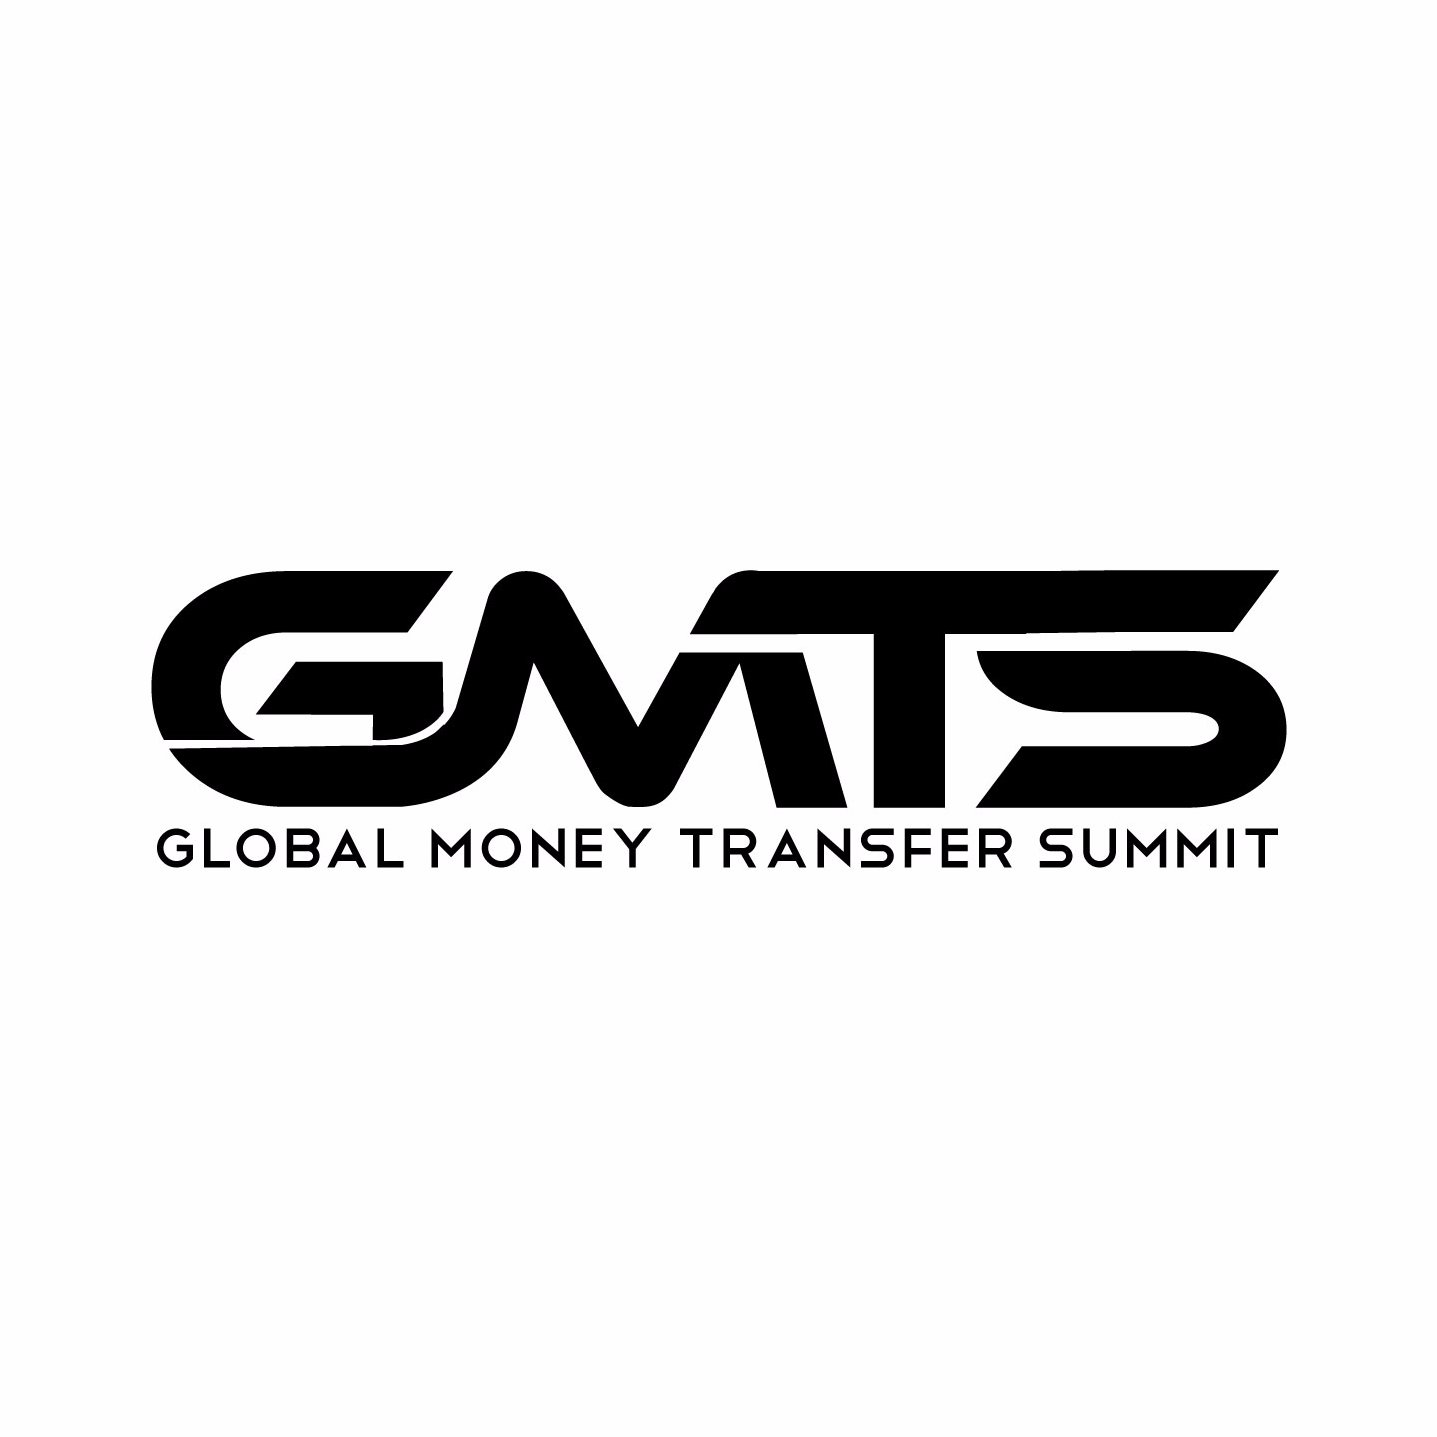 The annual summit inviting payment professionals from all over the world #digitalmoney #remittances #fintech #blockchain #innovation #moneytransfer